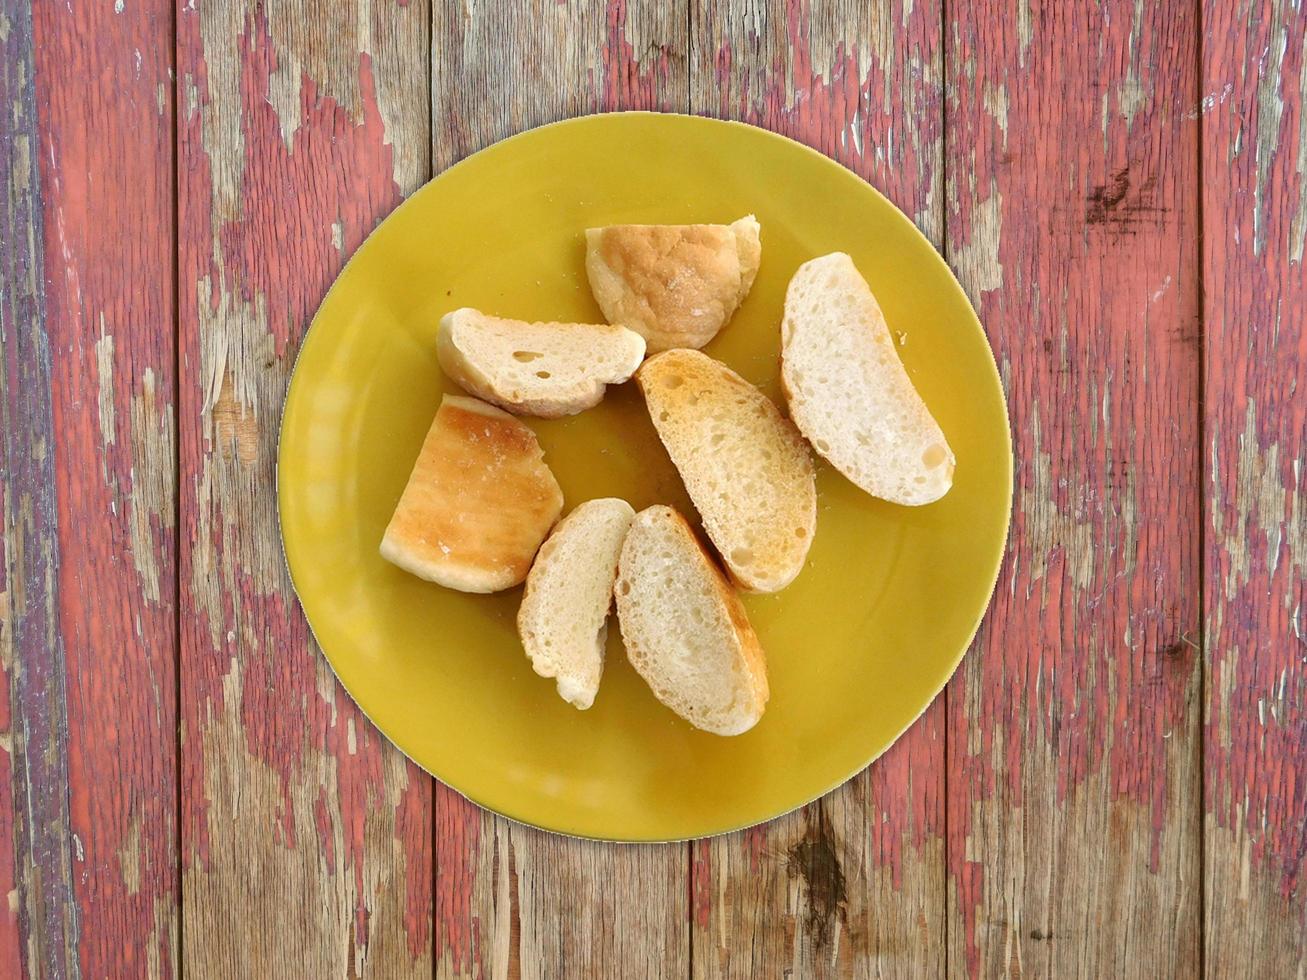 Sliced bread on a yellow plate on wooden table background photo